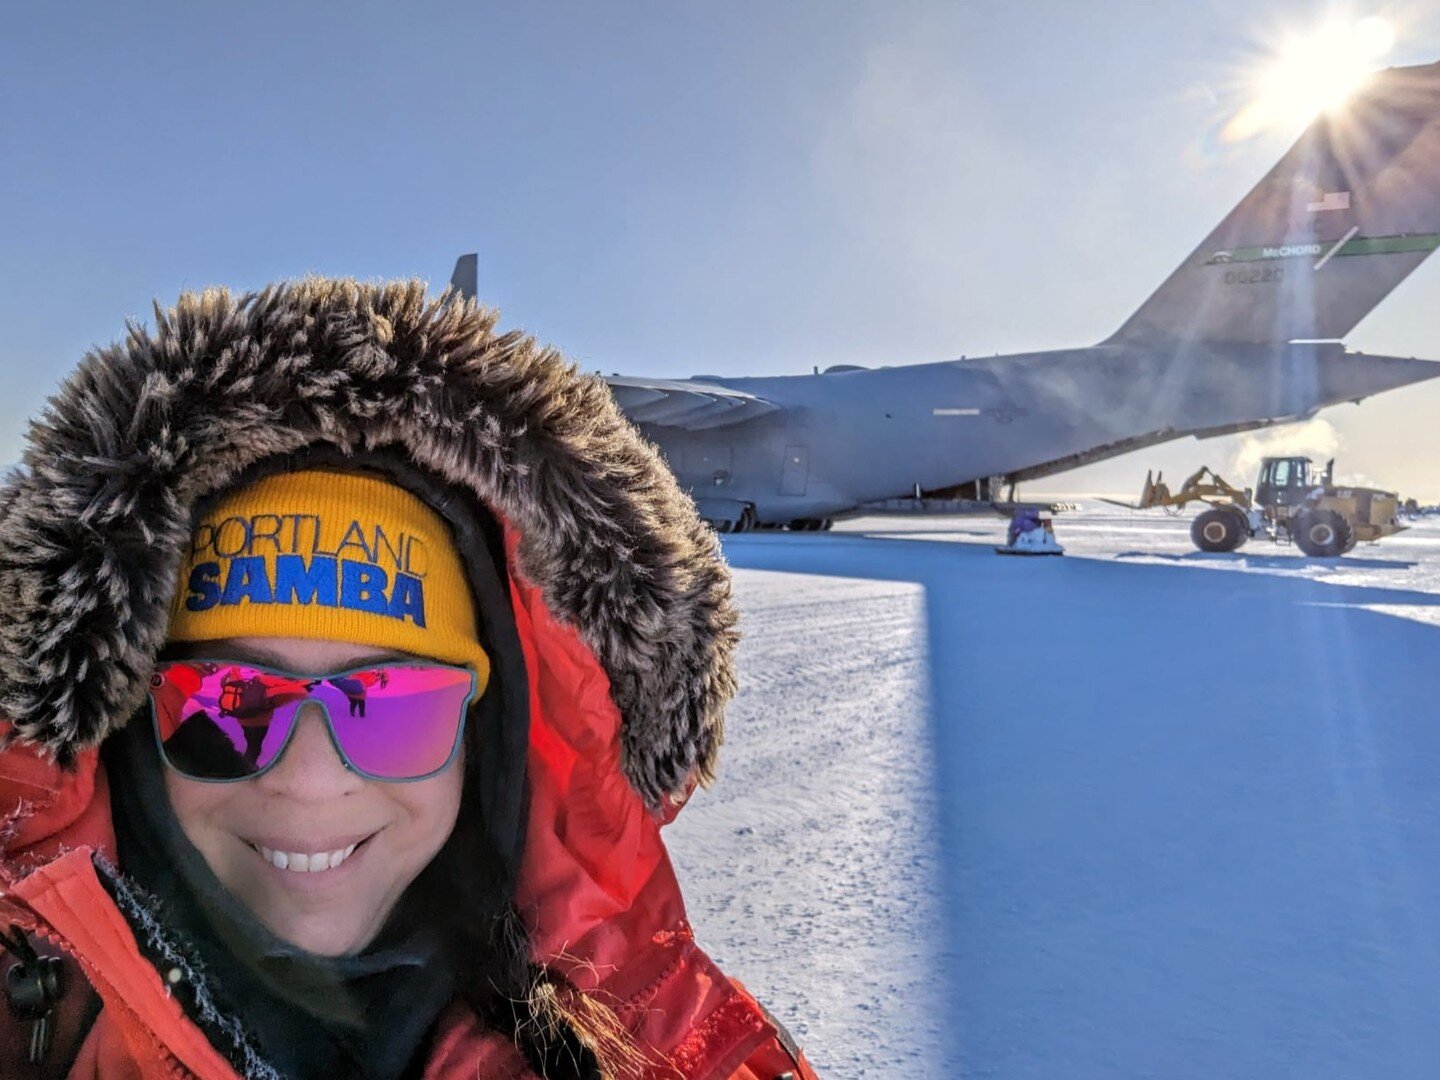 Nice beanie Shasta!
Our very own @shastafazi is working with airplanes at McMurdo Station, Antarctica again this year! We'll miss you woman! Have fun down there! 🥶

@mcmurdomemes 
#portlandsamba
#sambacommunityworldwide